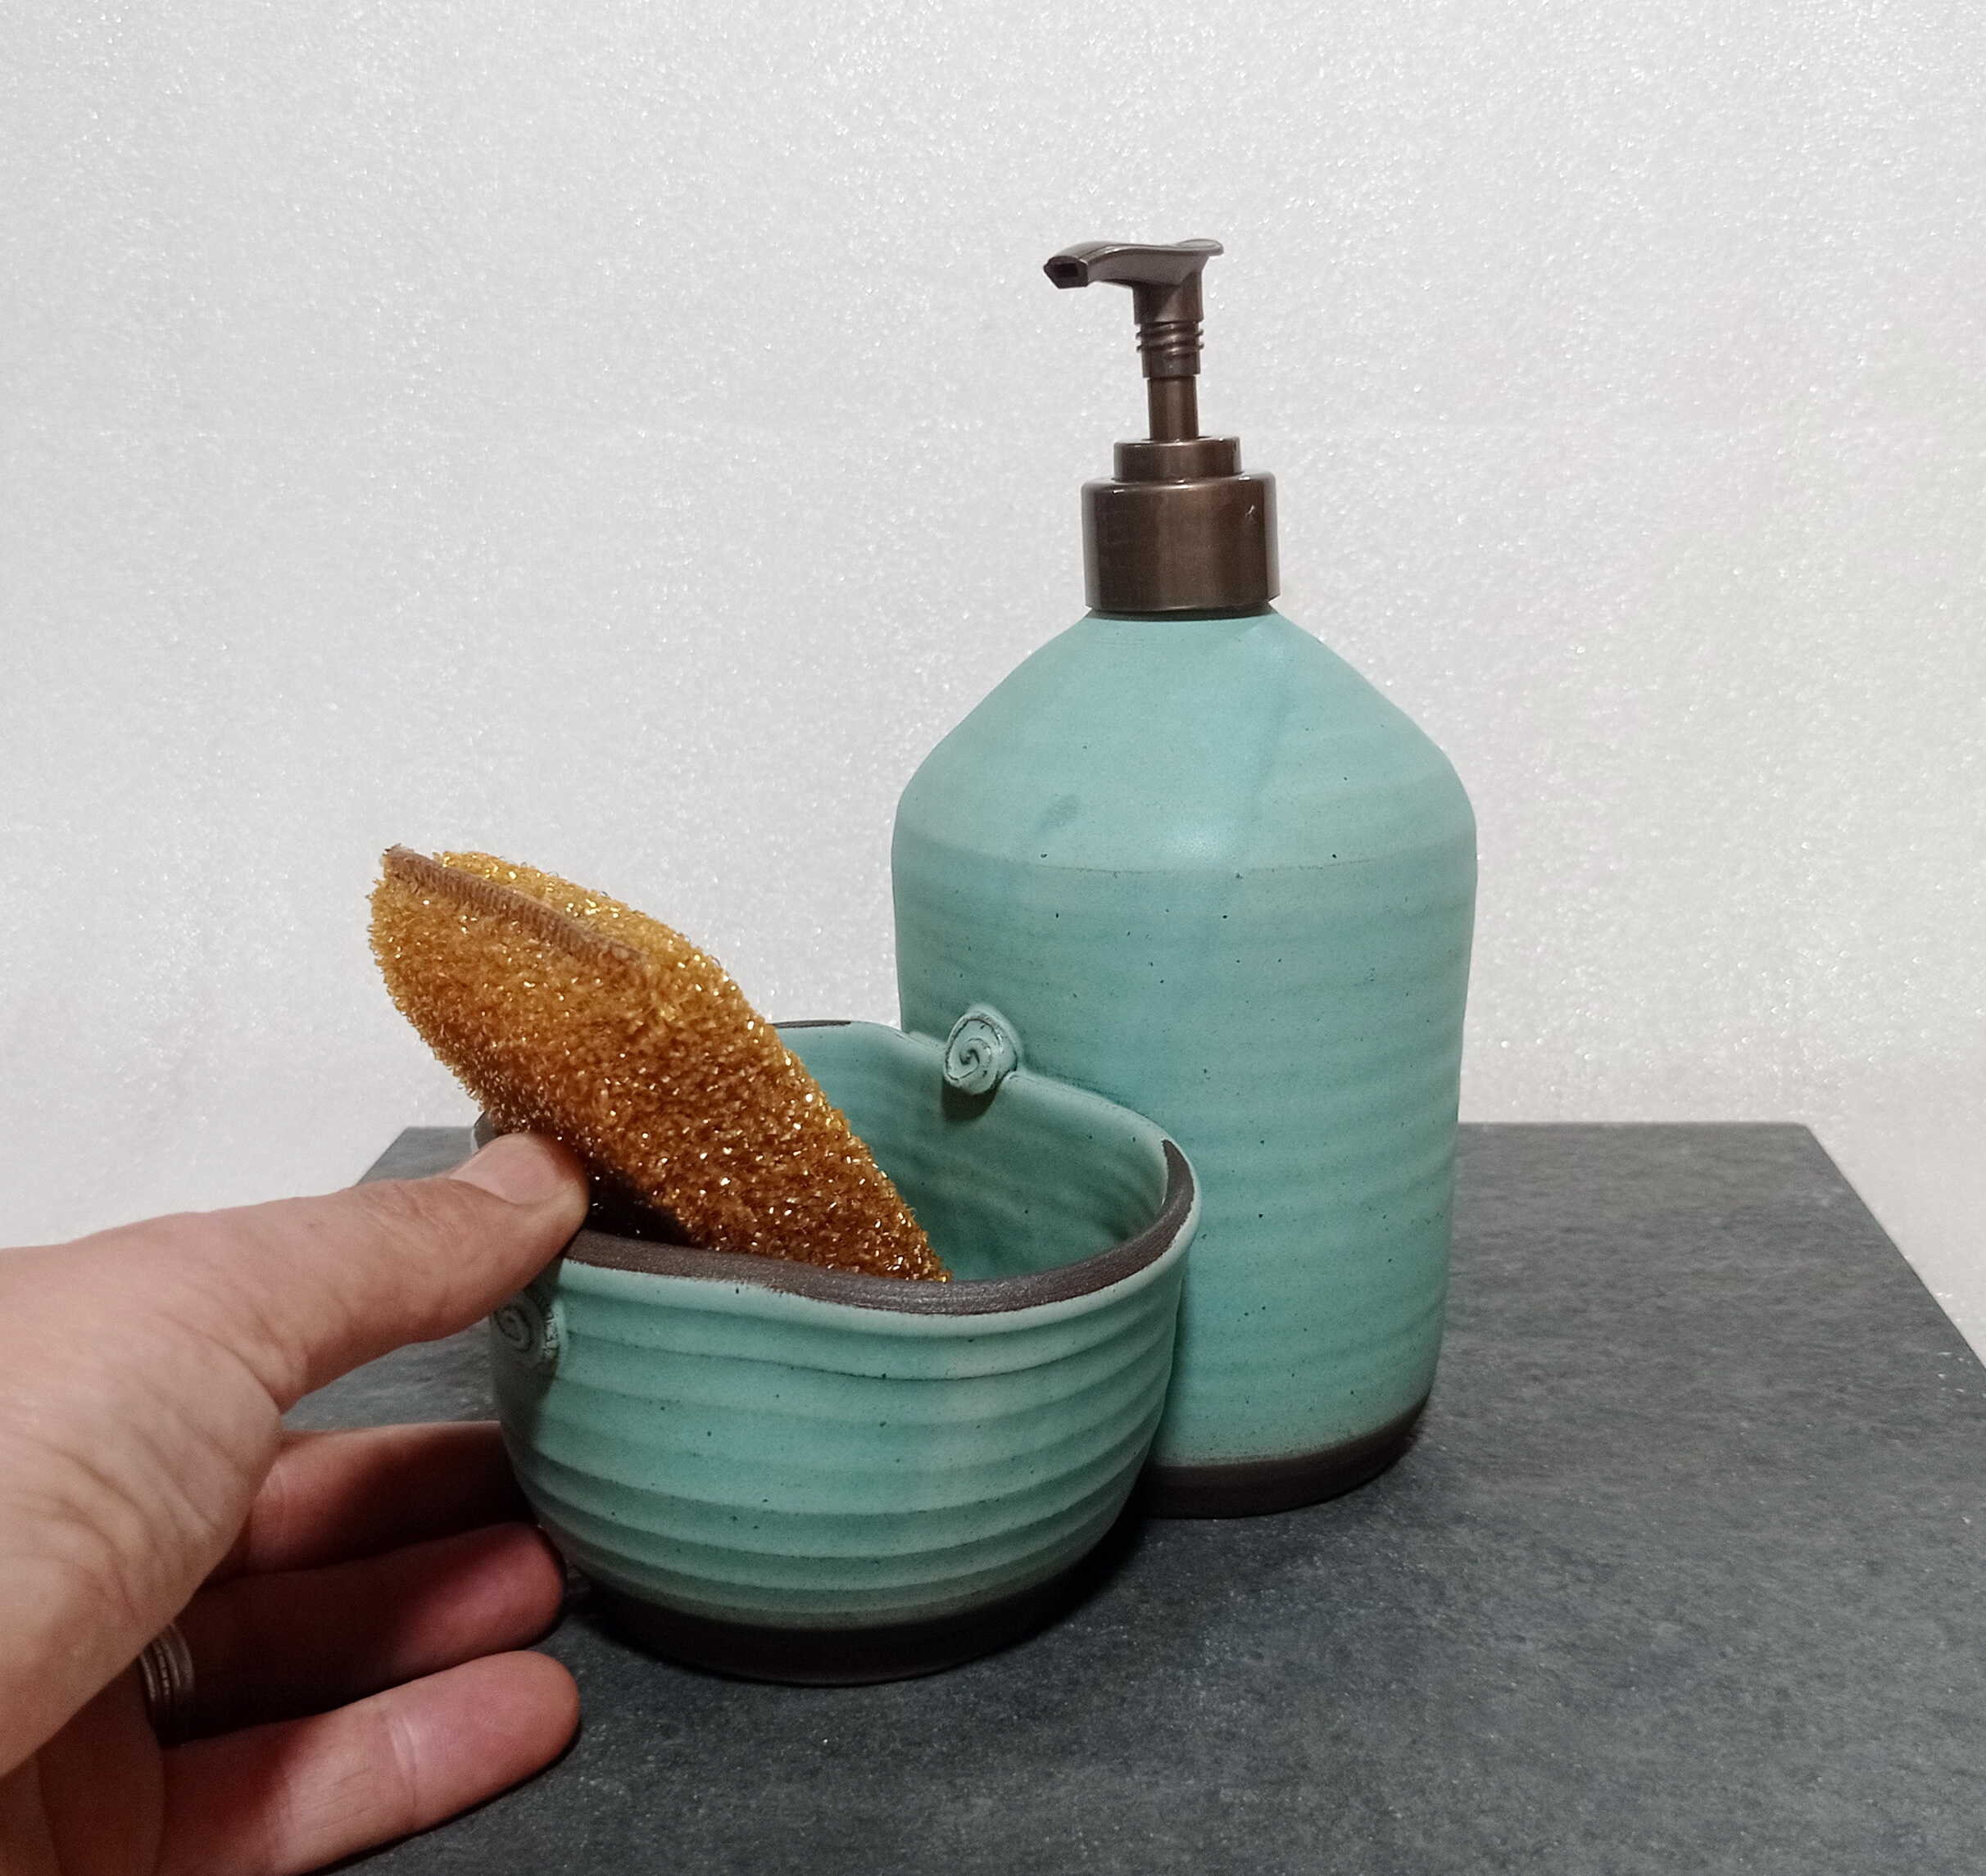 Handmade Ceramic Kitchen Sink Caddy With Glass Bottle Soap and